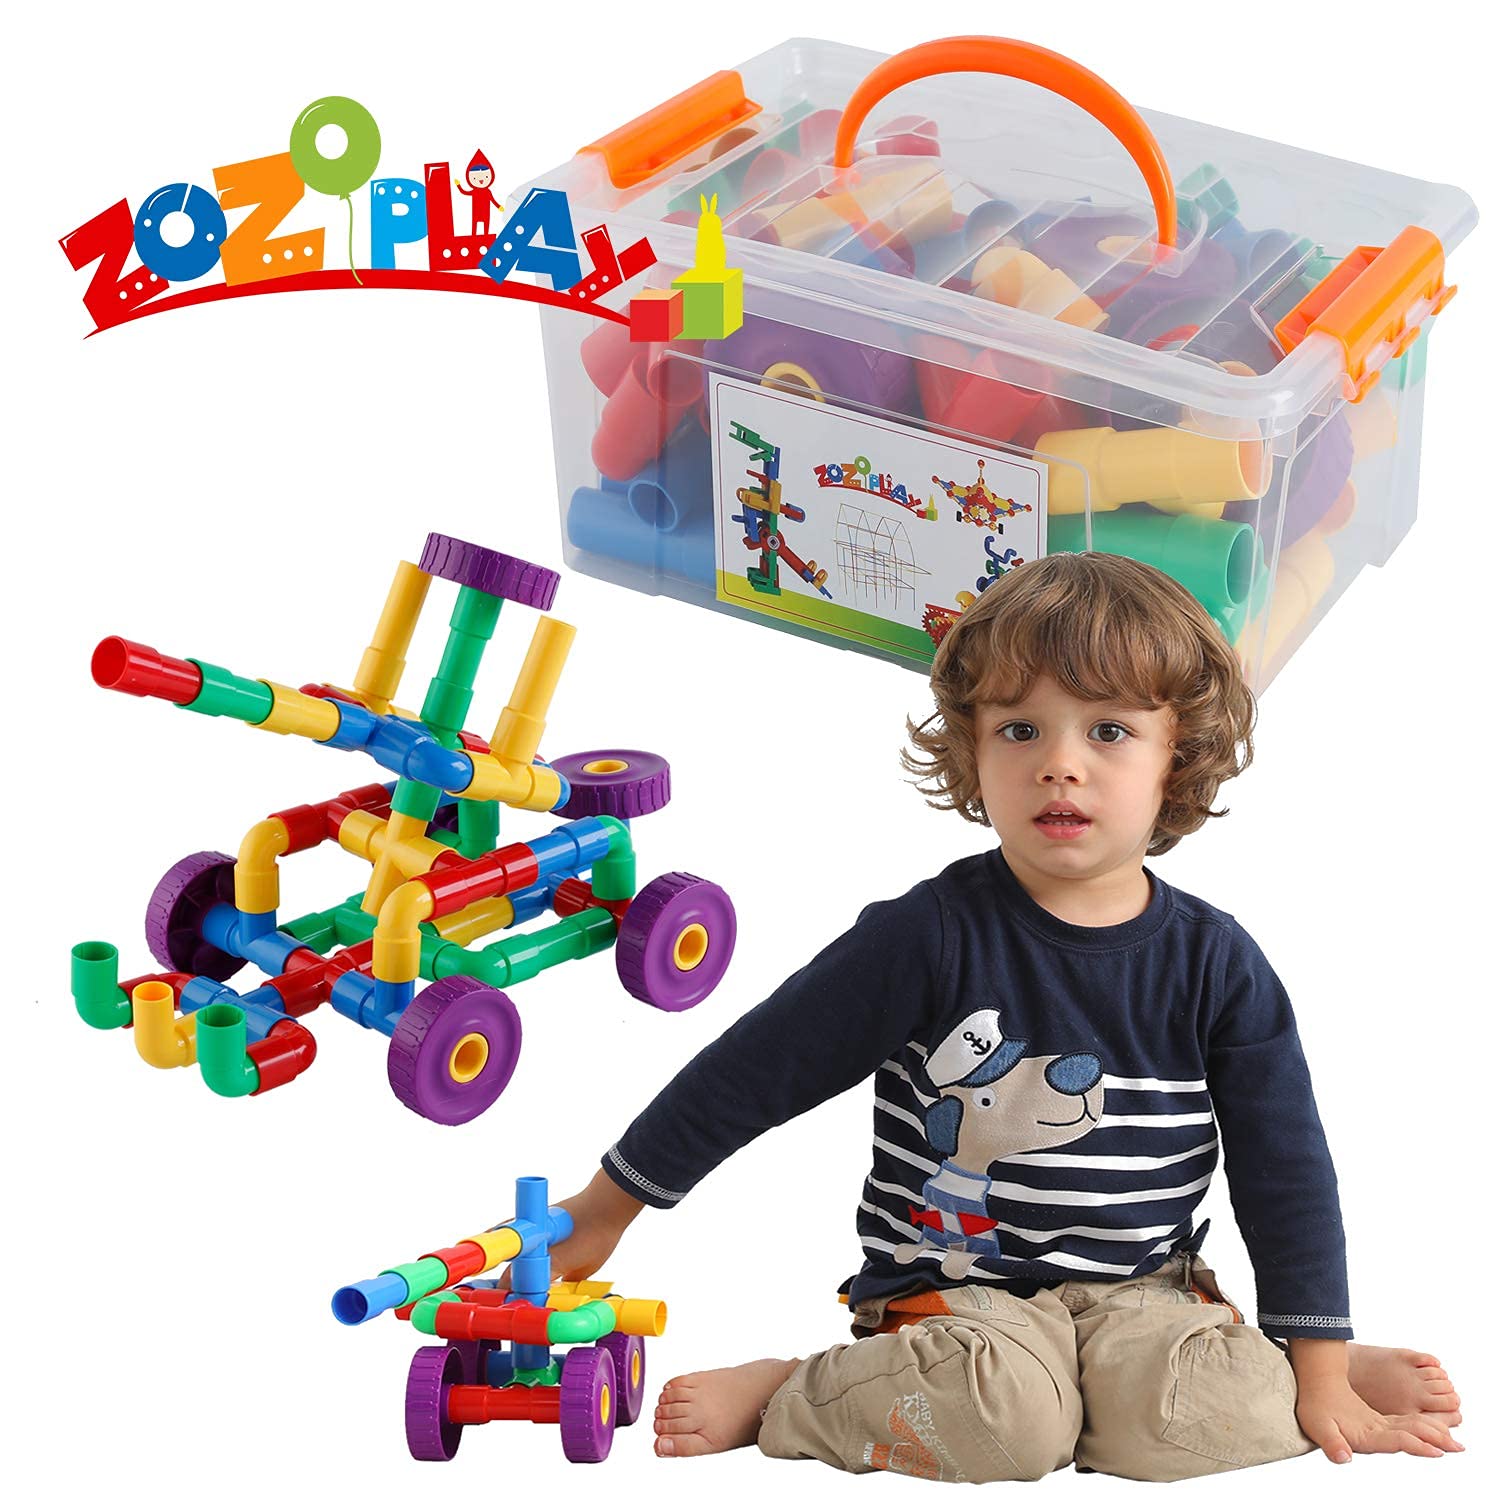 ZOZOPLAY STEM Learning Toy Tubular Pipes & Spouts & Joints 64 Piece Build Bicycle, Tank, Scootie, Moter Skills Endless Designs Educational Building Blocks Set for Kid Ages 3+ Multicolor